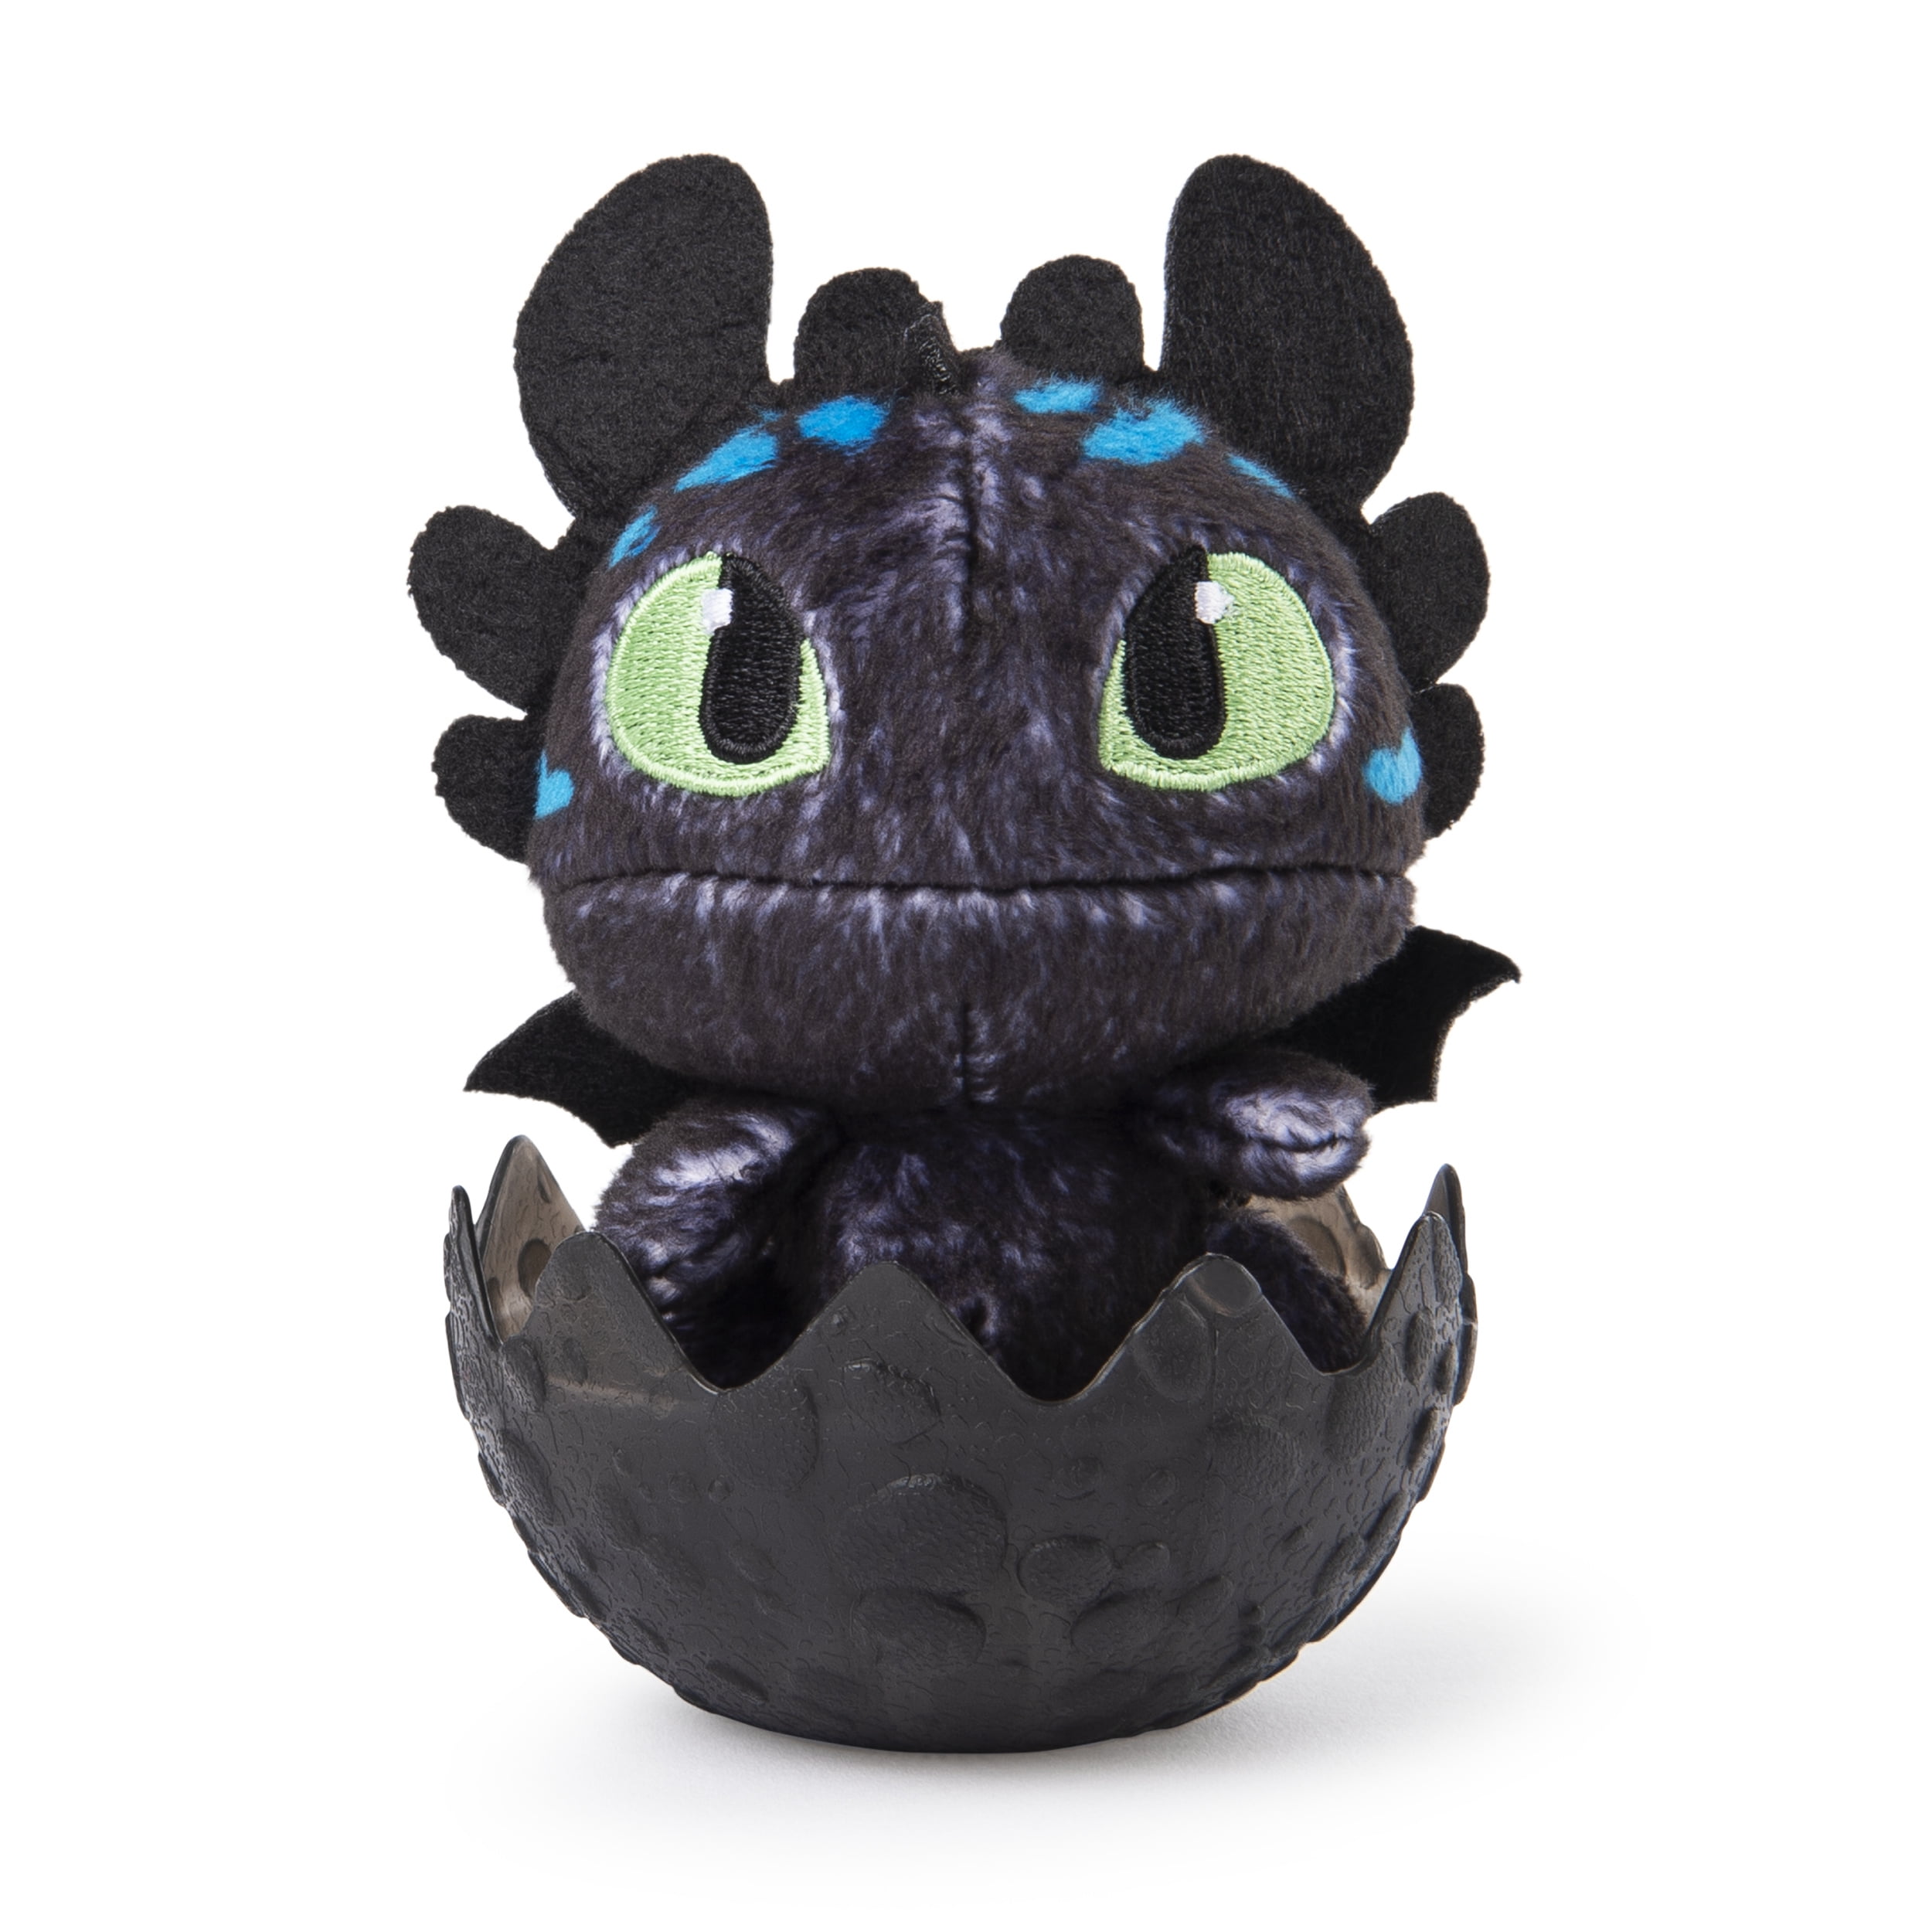 DreamWorks Dragons, Baby Toothless 3-inch Plush, Cute Collectible Plush ...